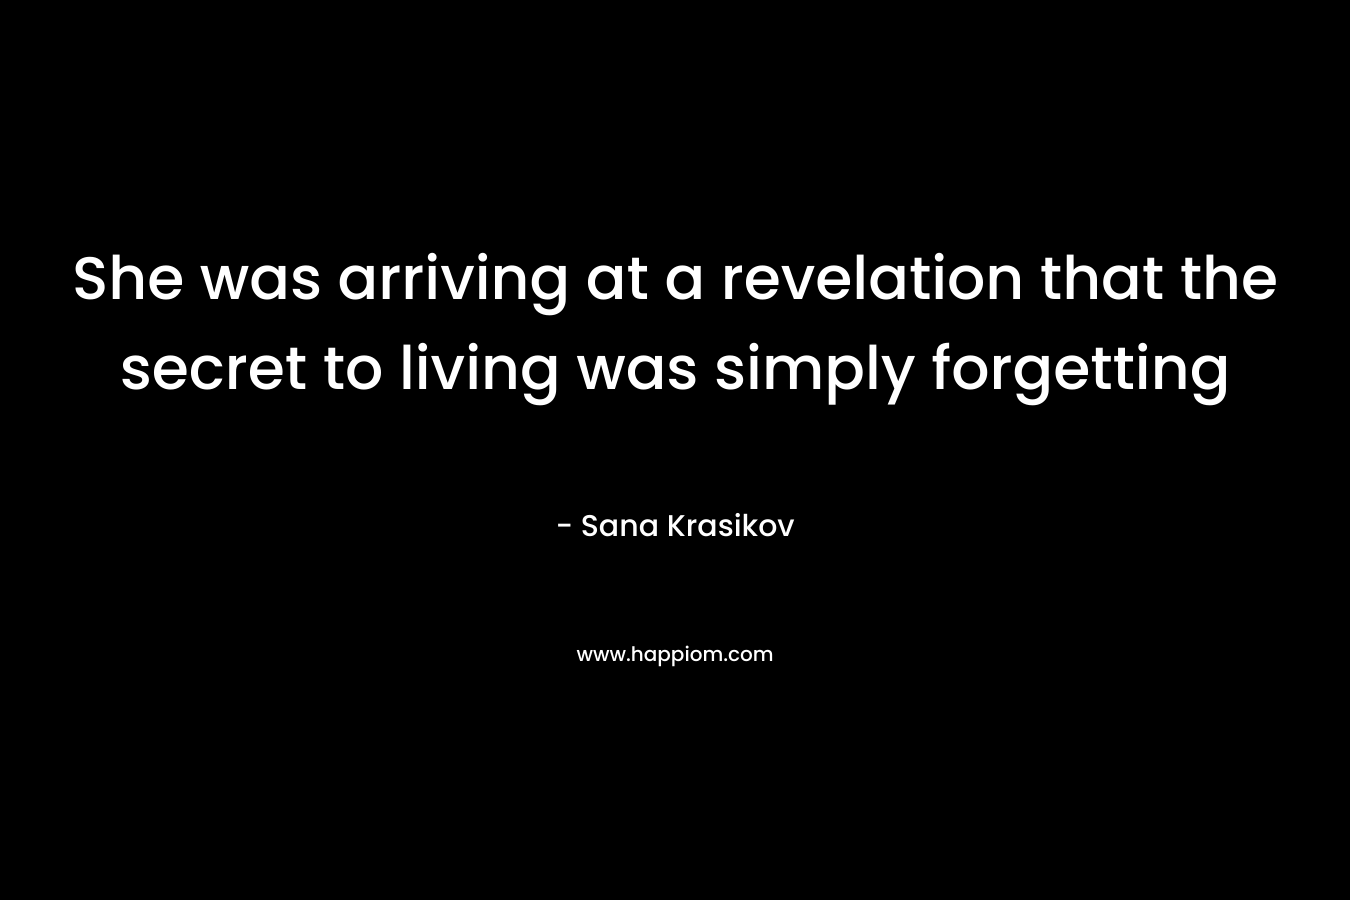 She was arriving at a revelation that the secret to living was simply forgetting – Sana Krasikov